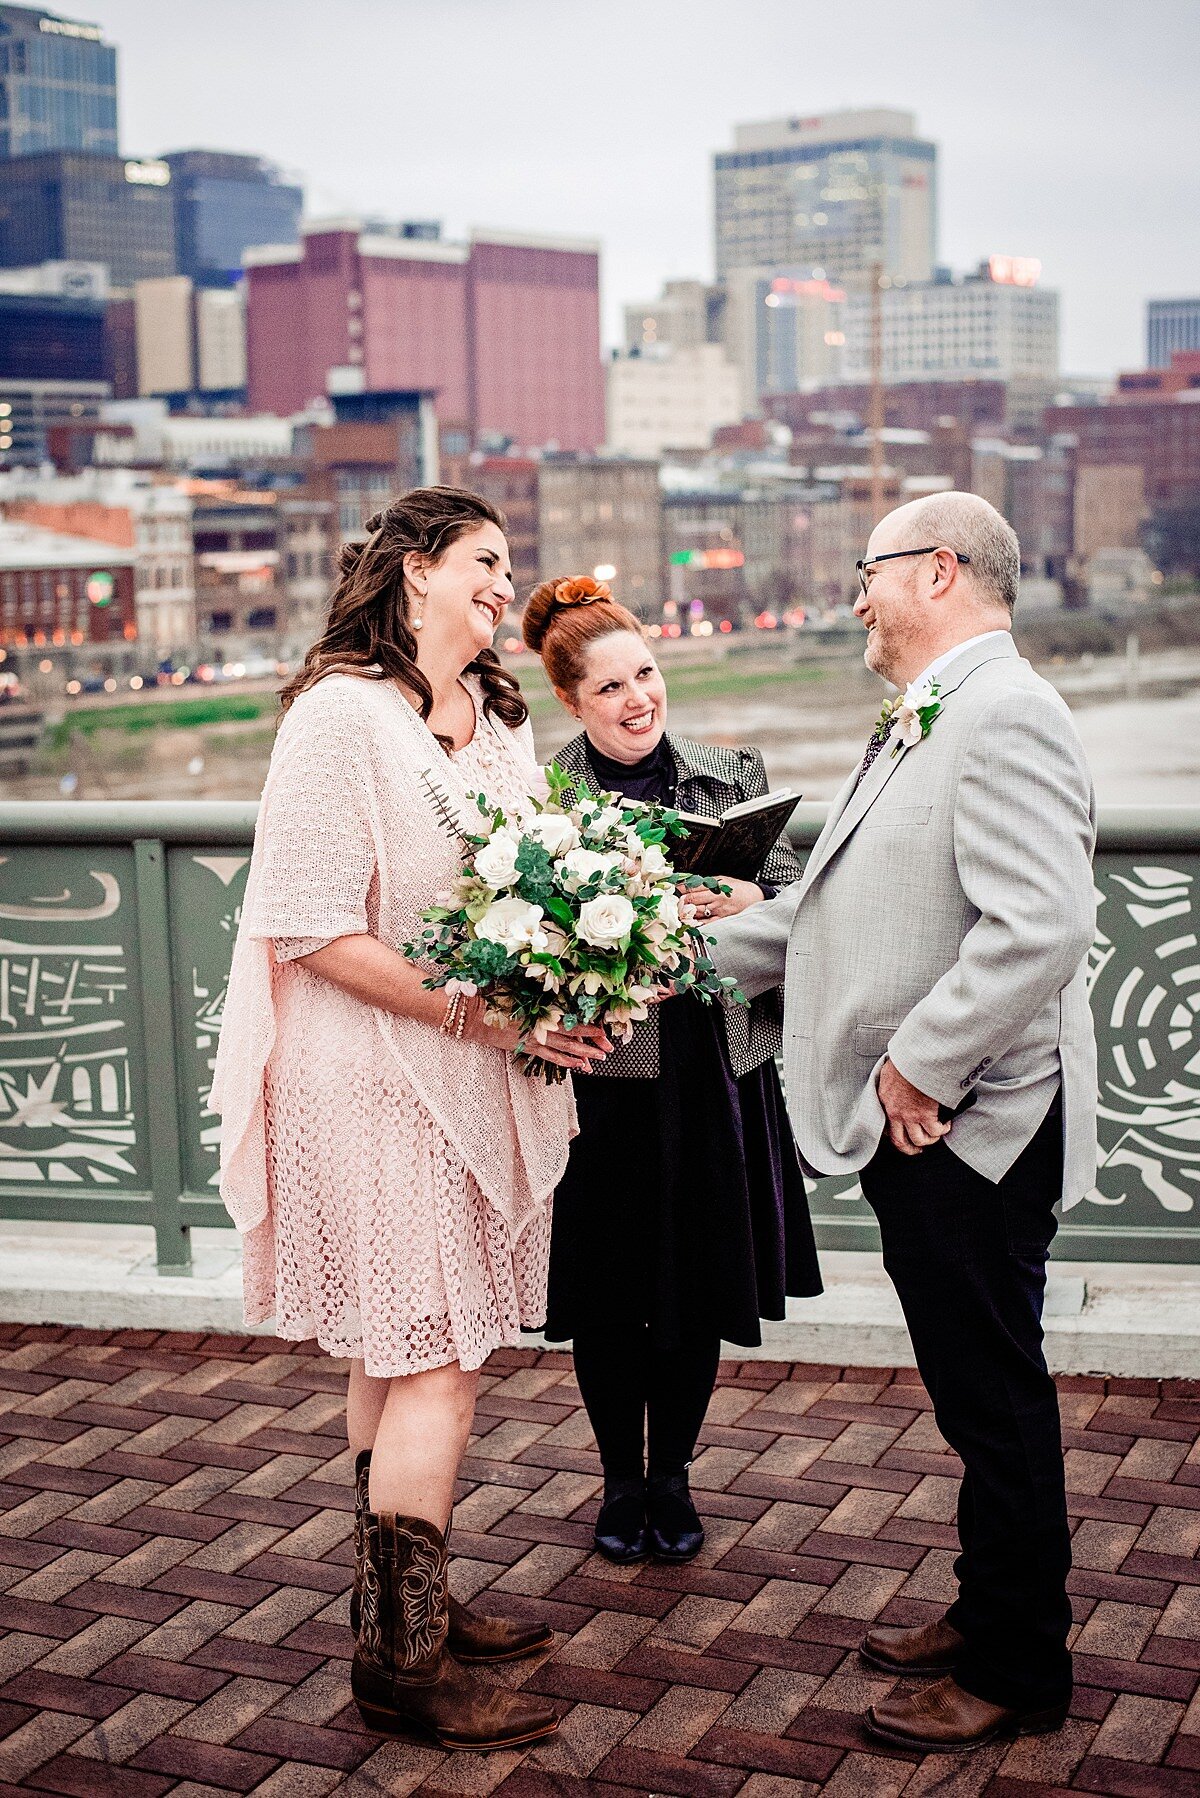 Elope in Tennessee pedestrian bridge elopement on a rainy day